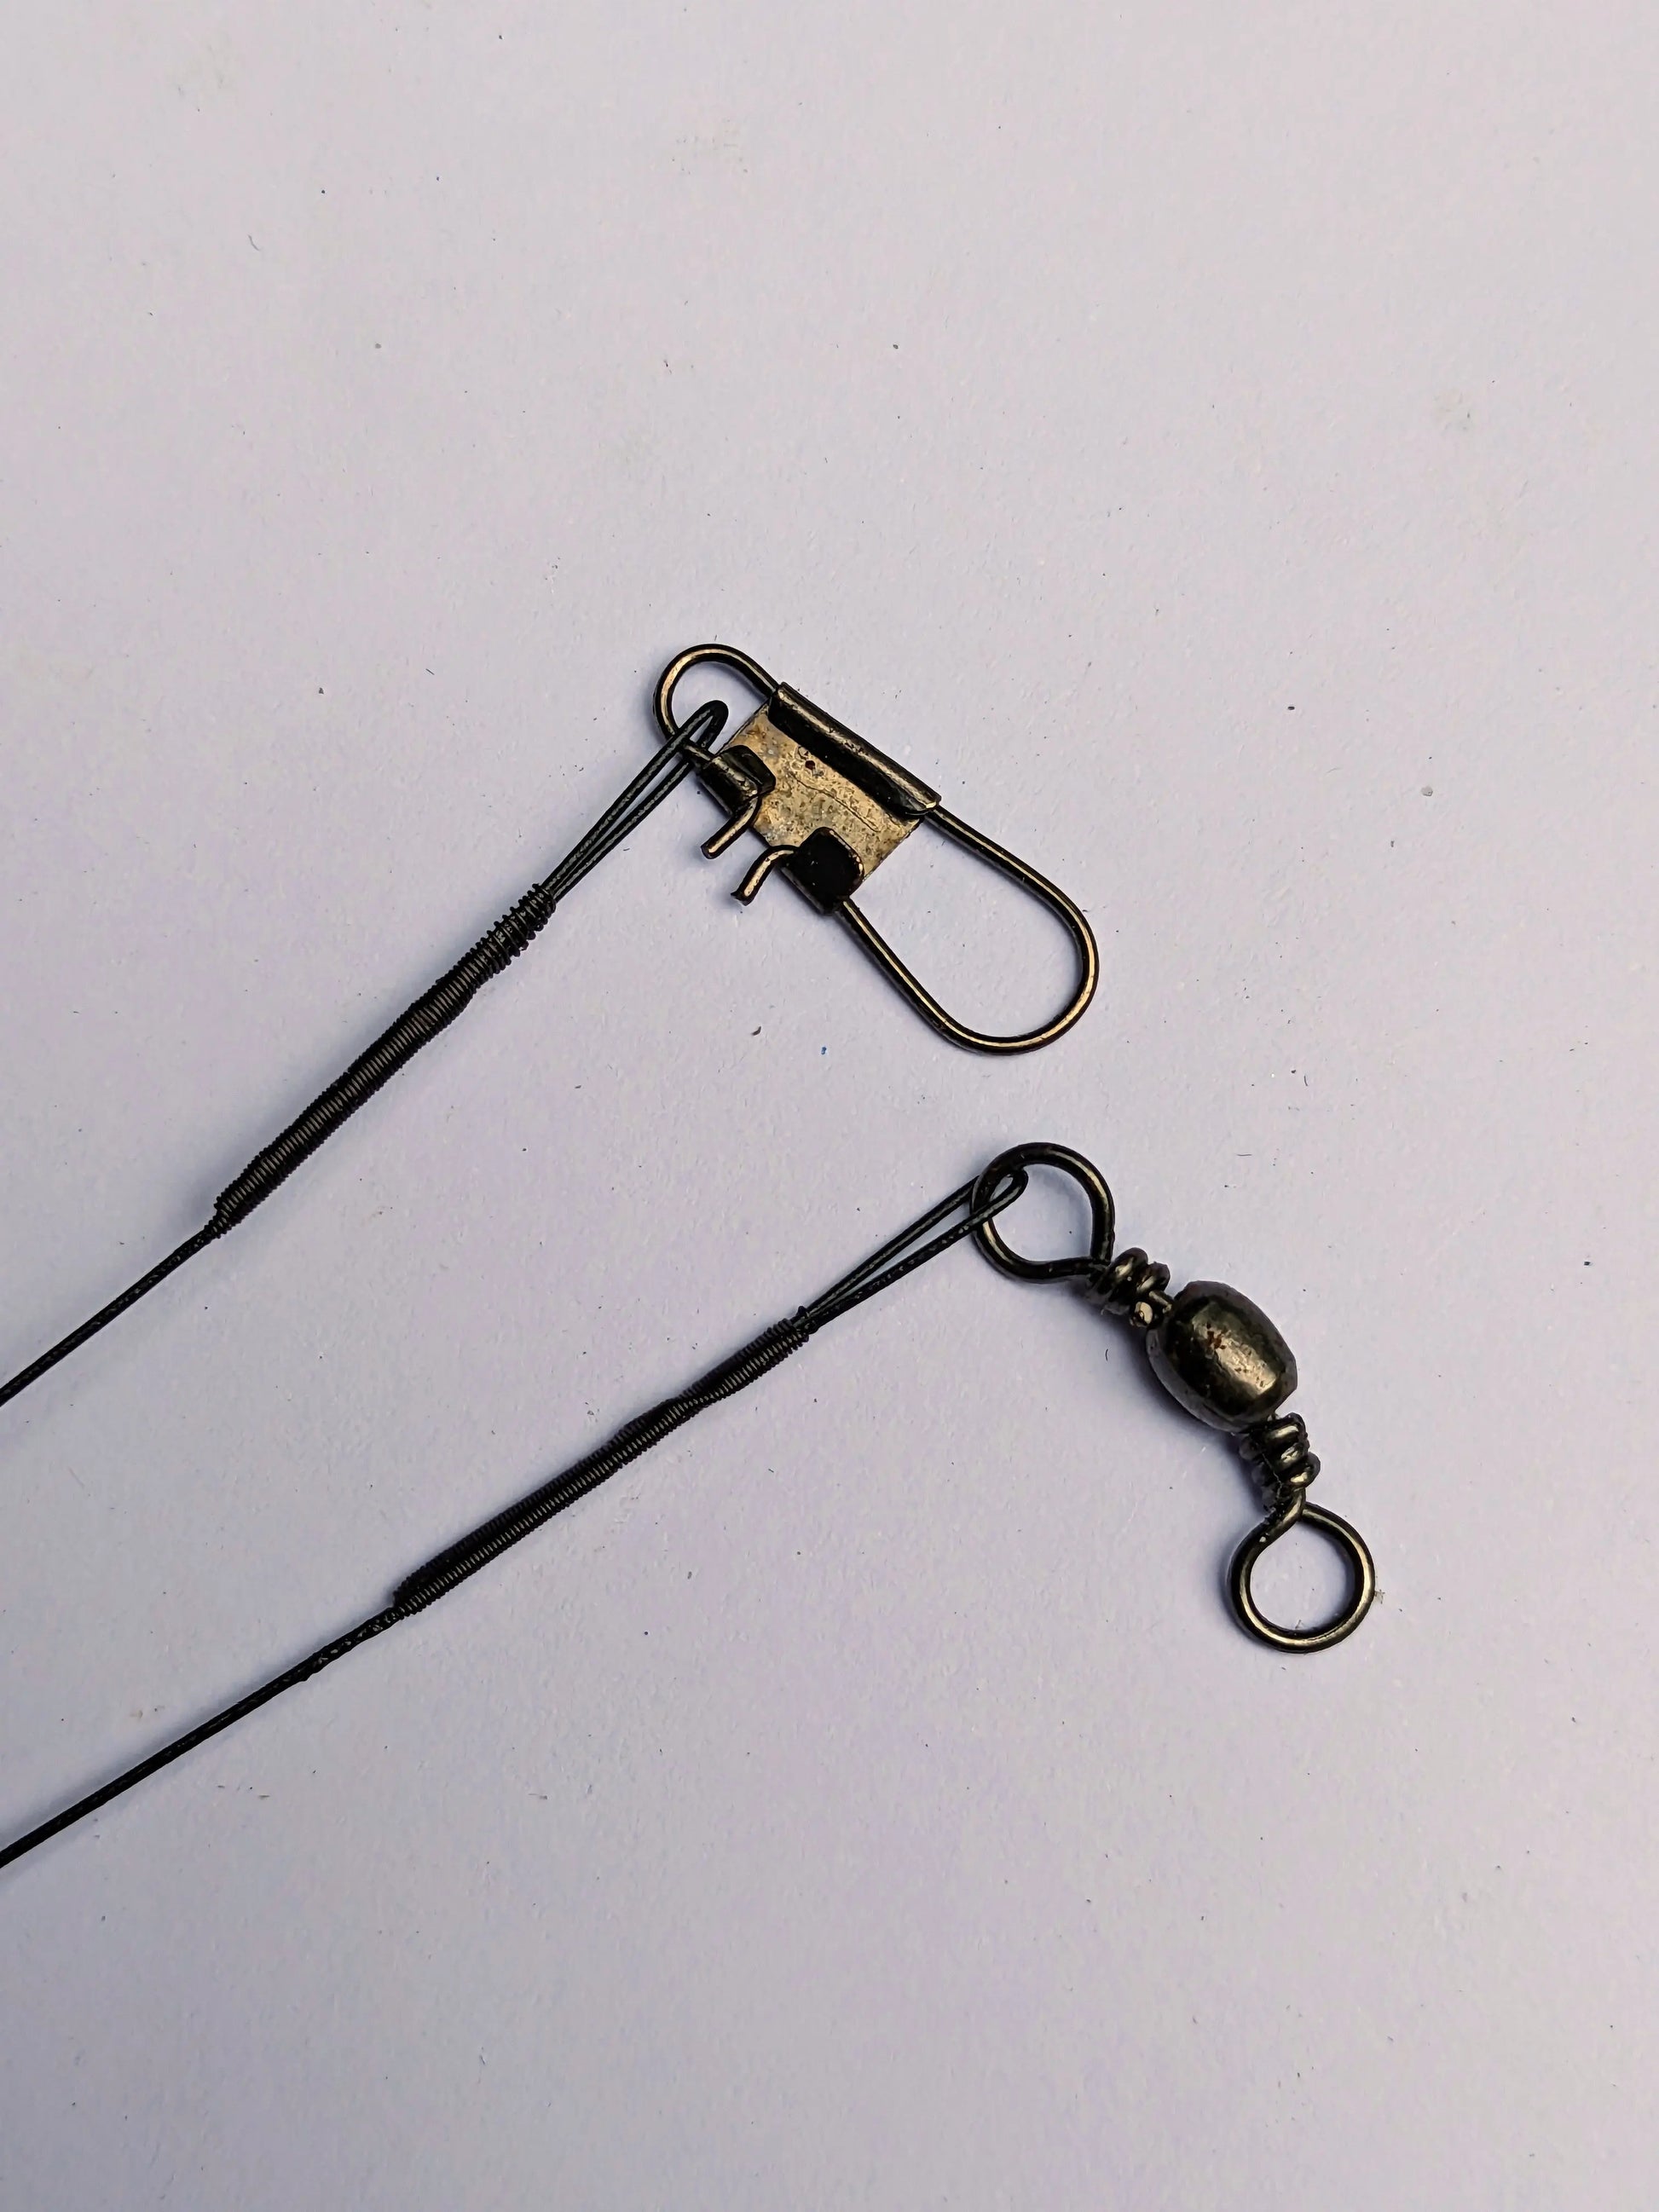 Metal Leader with Clip and Swivel 10 pack northatlanticfishing.com